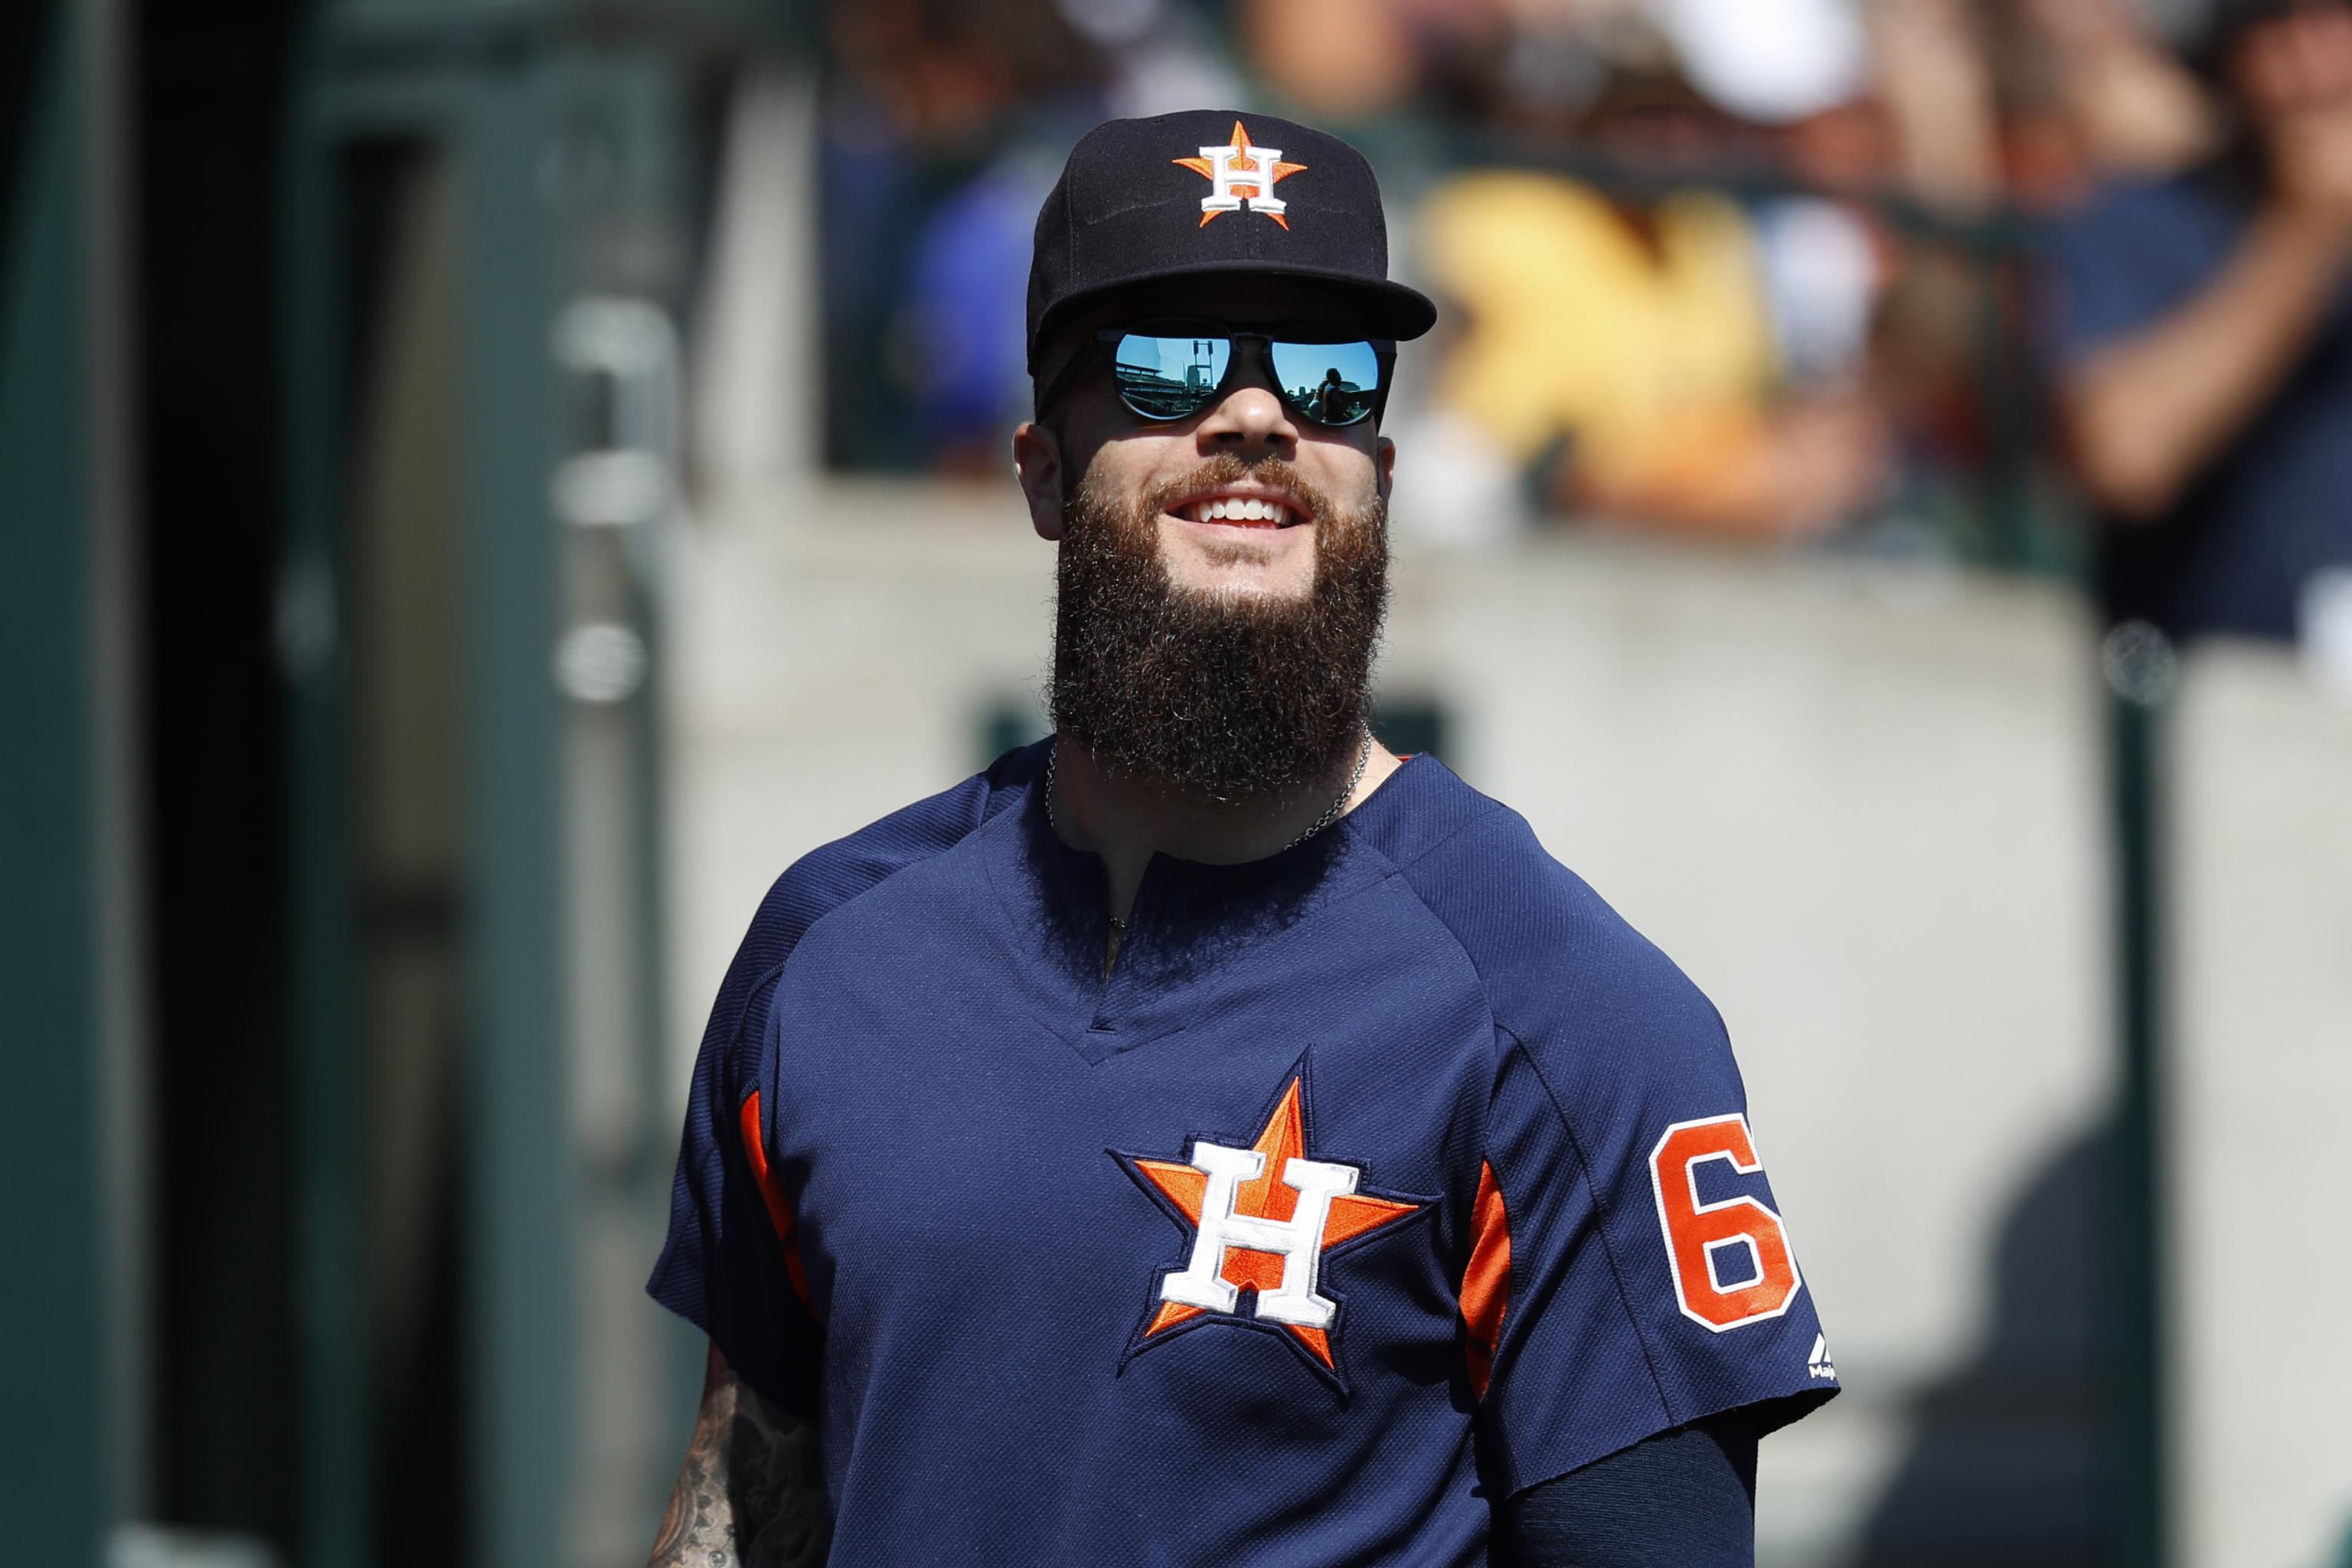 Not being valued' by Astros, Dallas Keuchel finds home with Braves